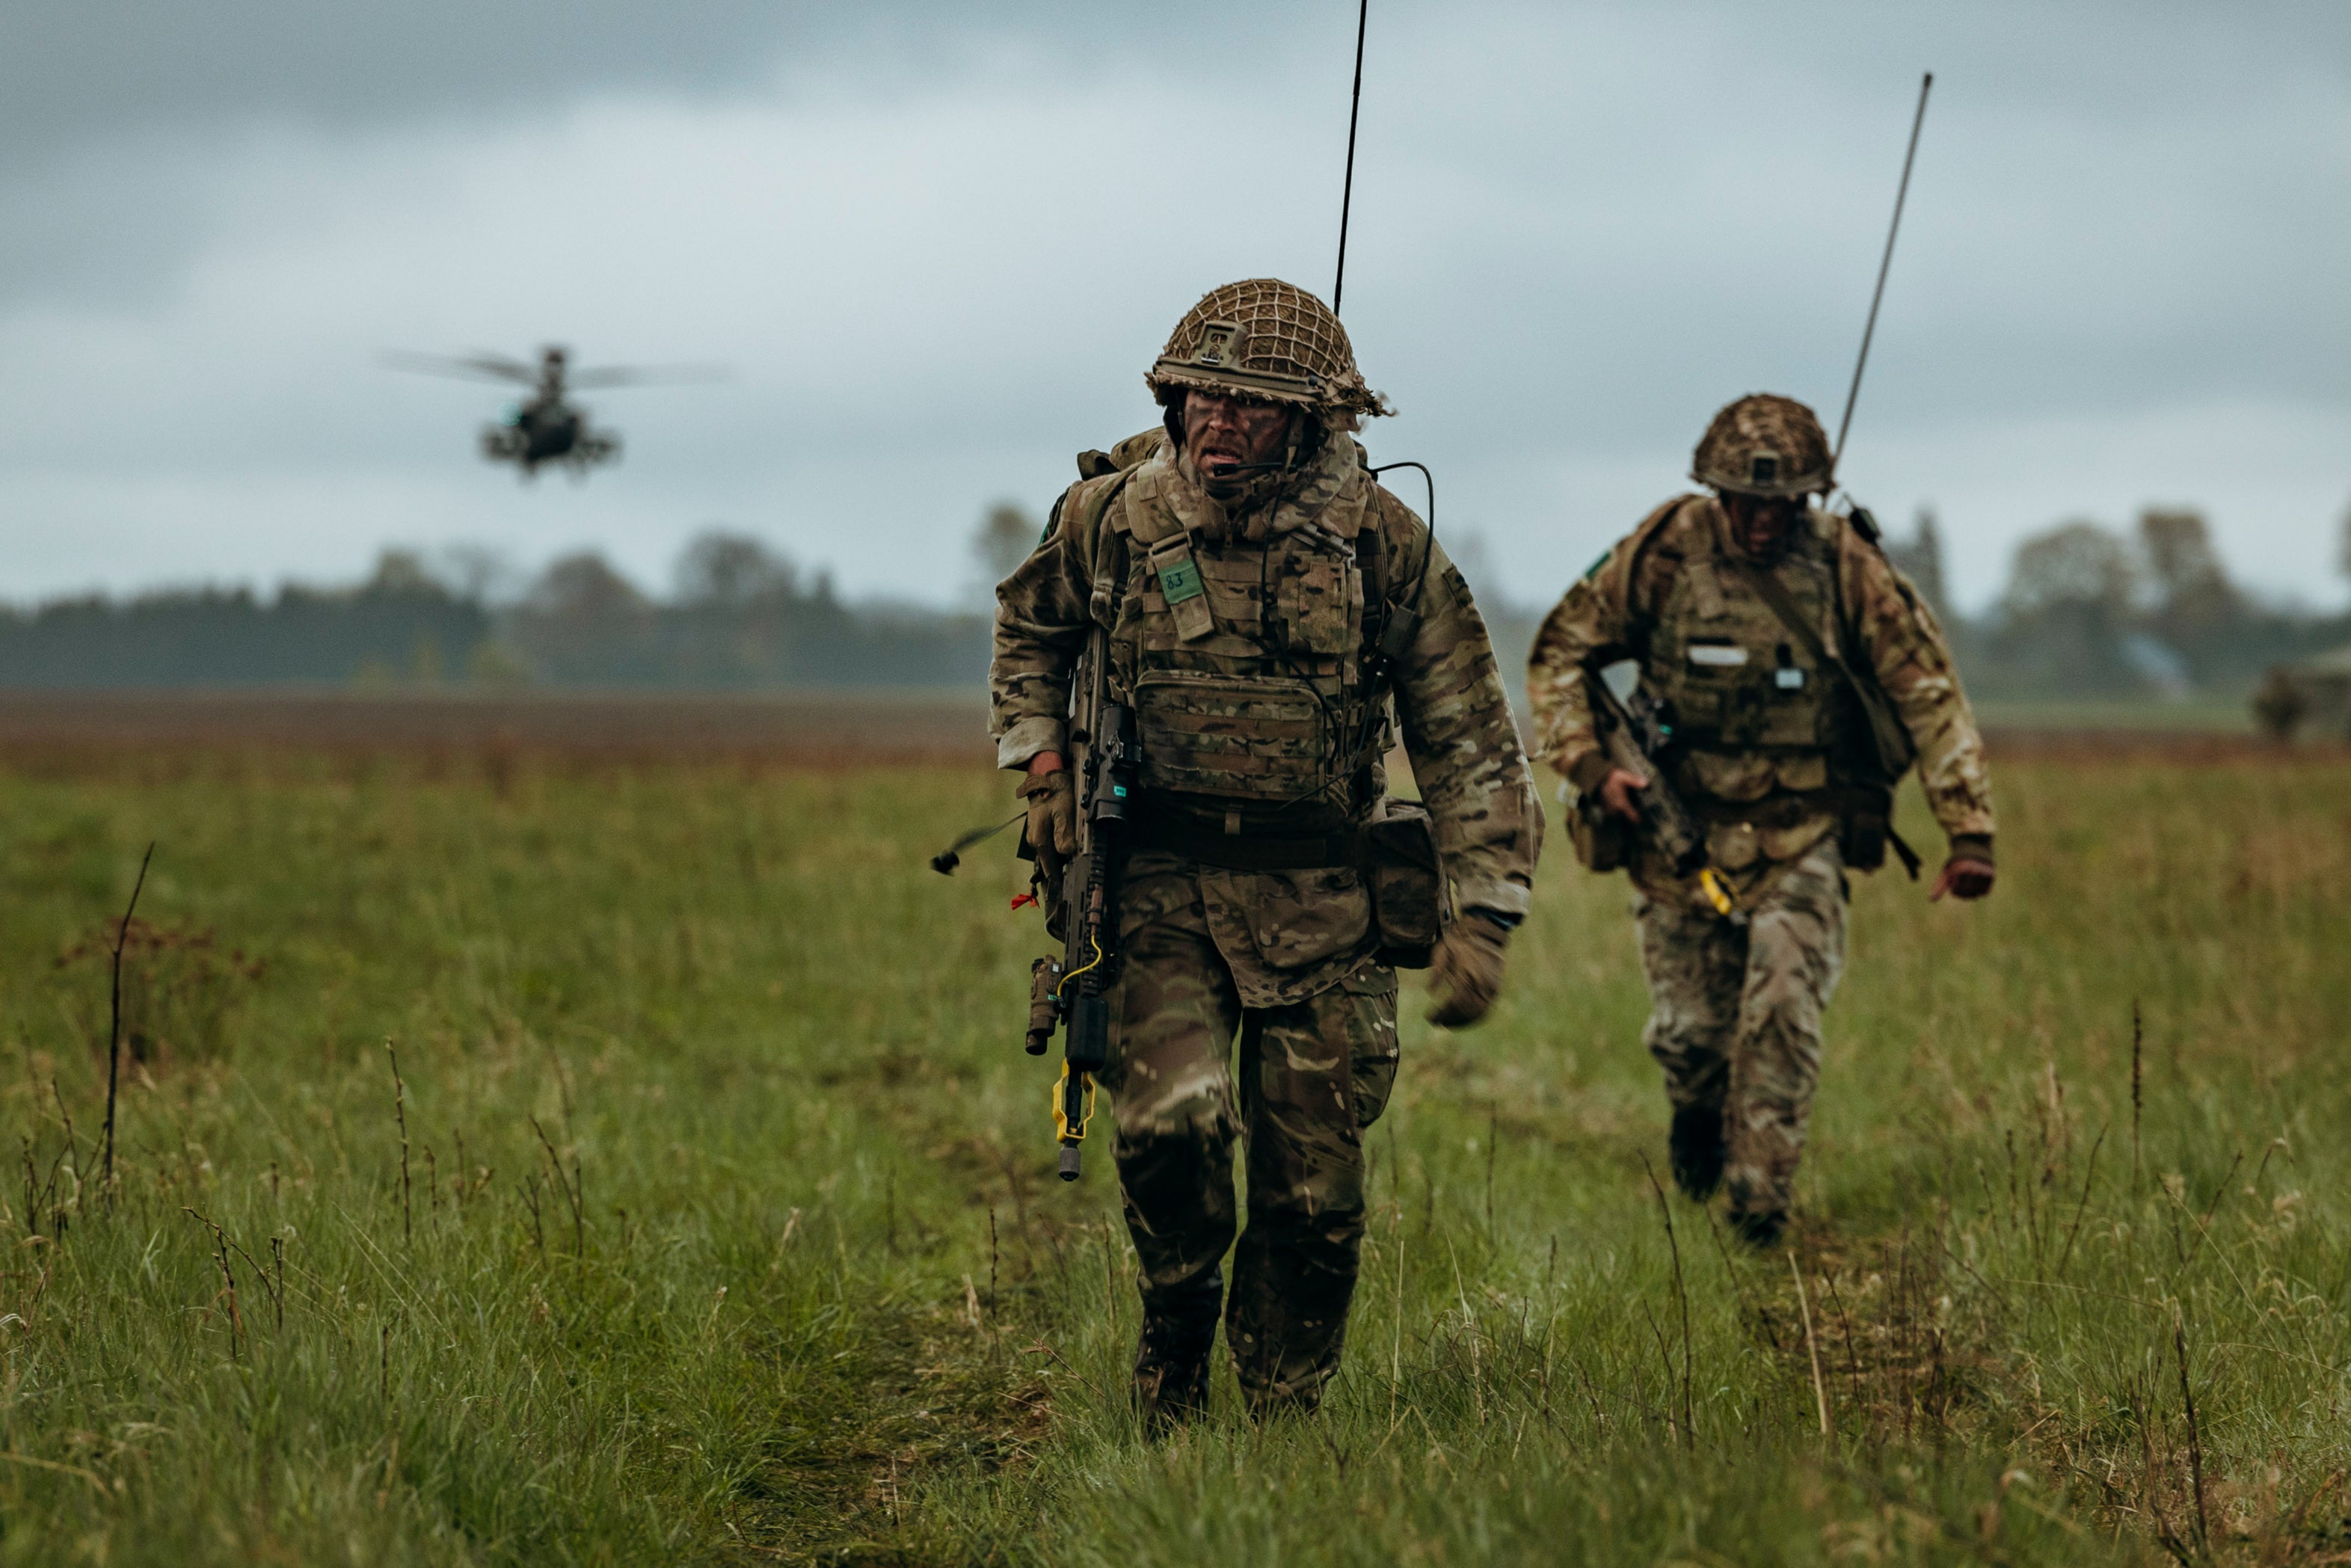 Paratroopers from the 3rd Battalion, the Parachute Regiment, during Exercise Swift Response in Estonia